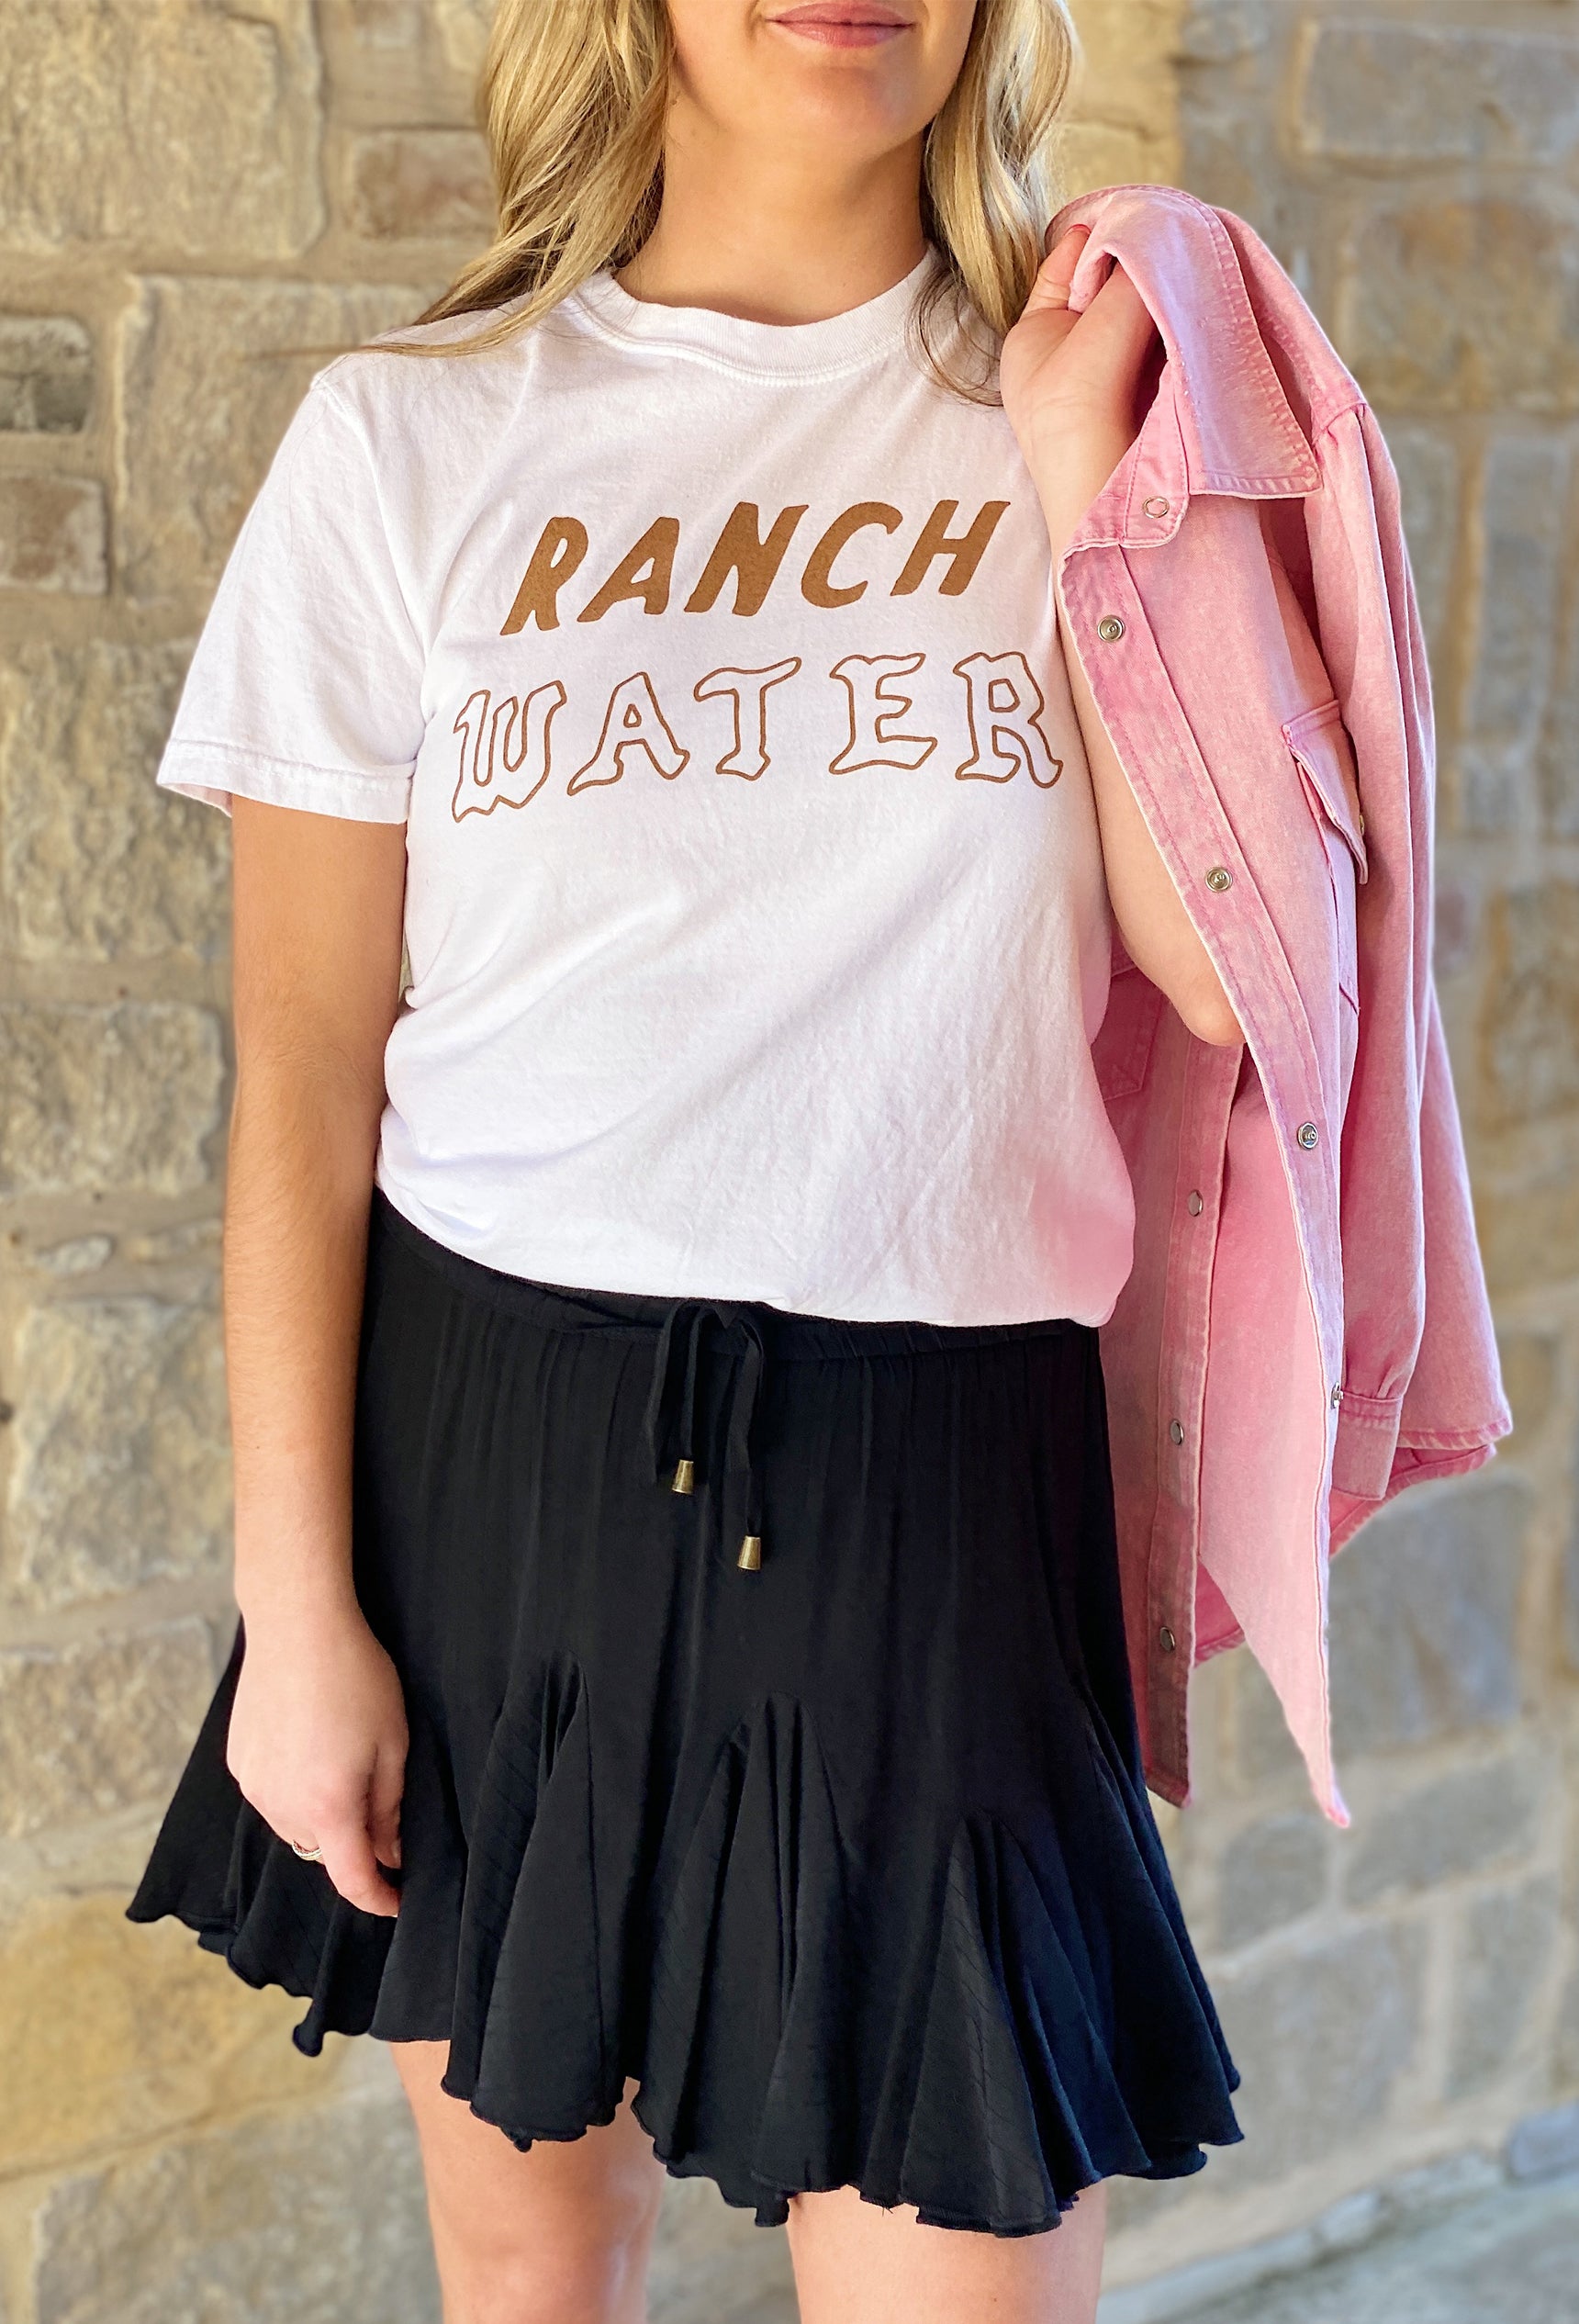 Charlie Southern: Ranch Water T-Shirt, white t-shirt with the words "ranch water" printed across the front